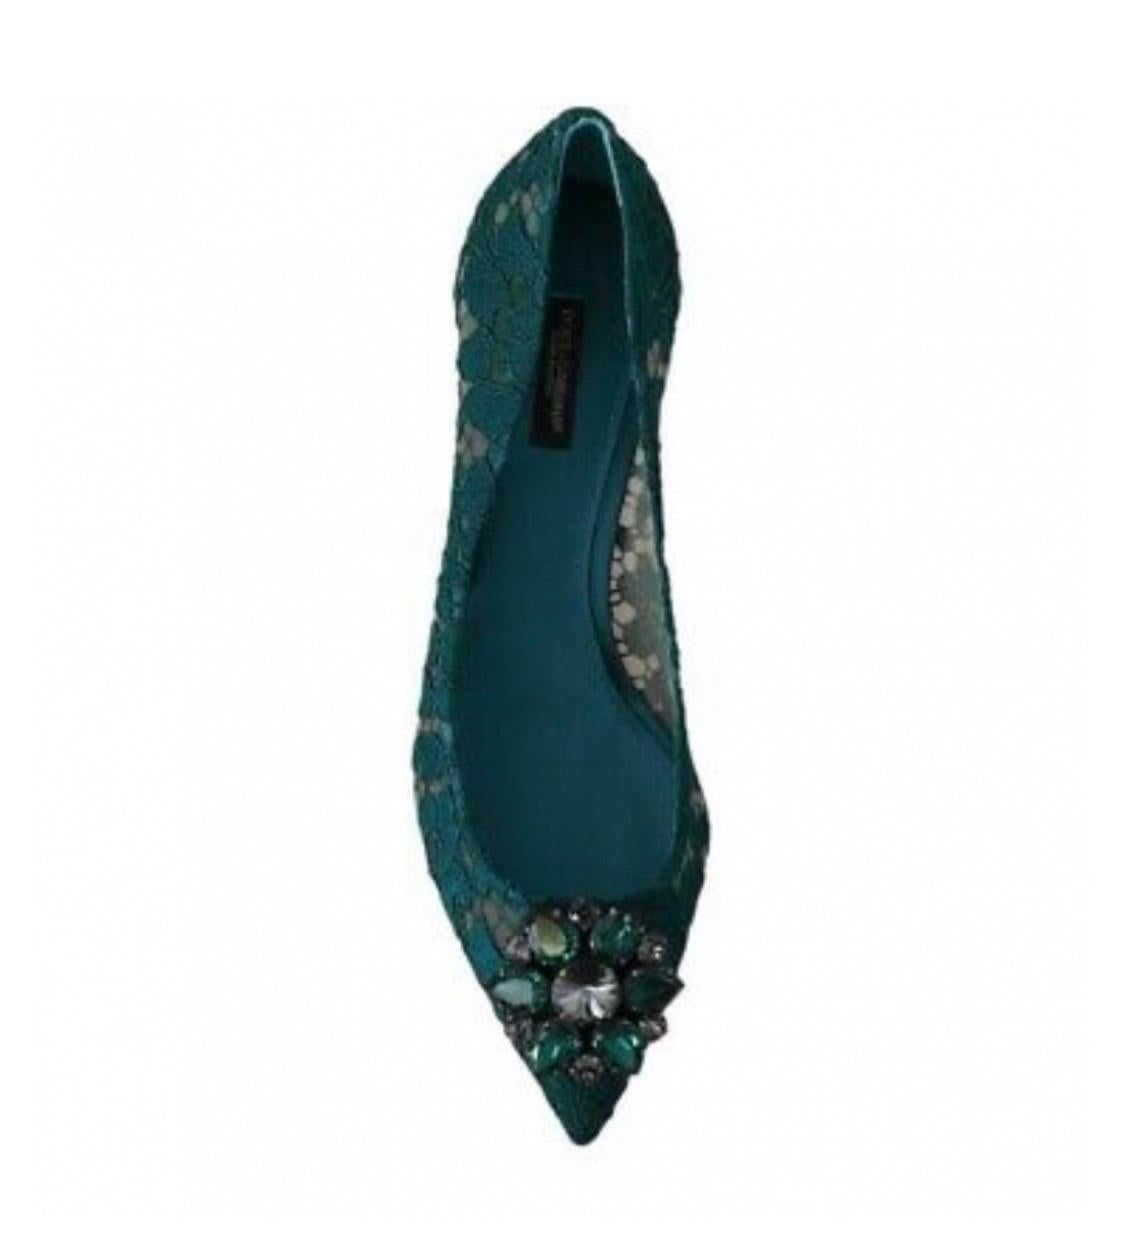 Black Dolce & Gabbana green PUMP lace
shoes with jewel detail on the top heels 